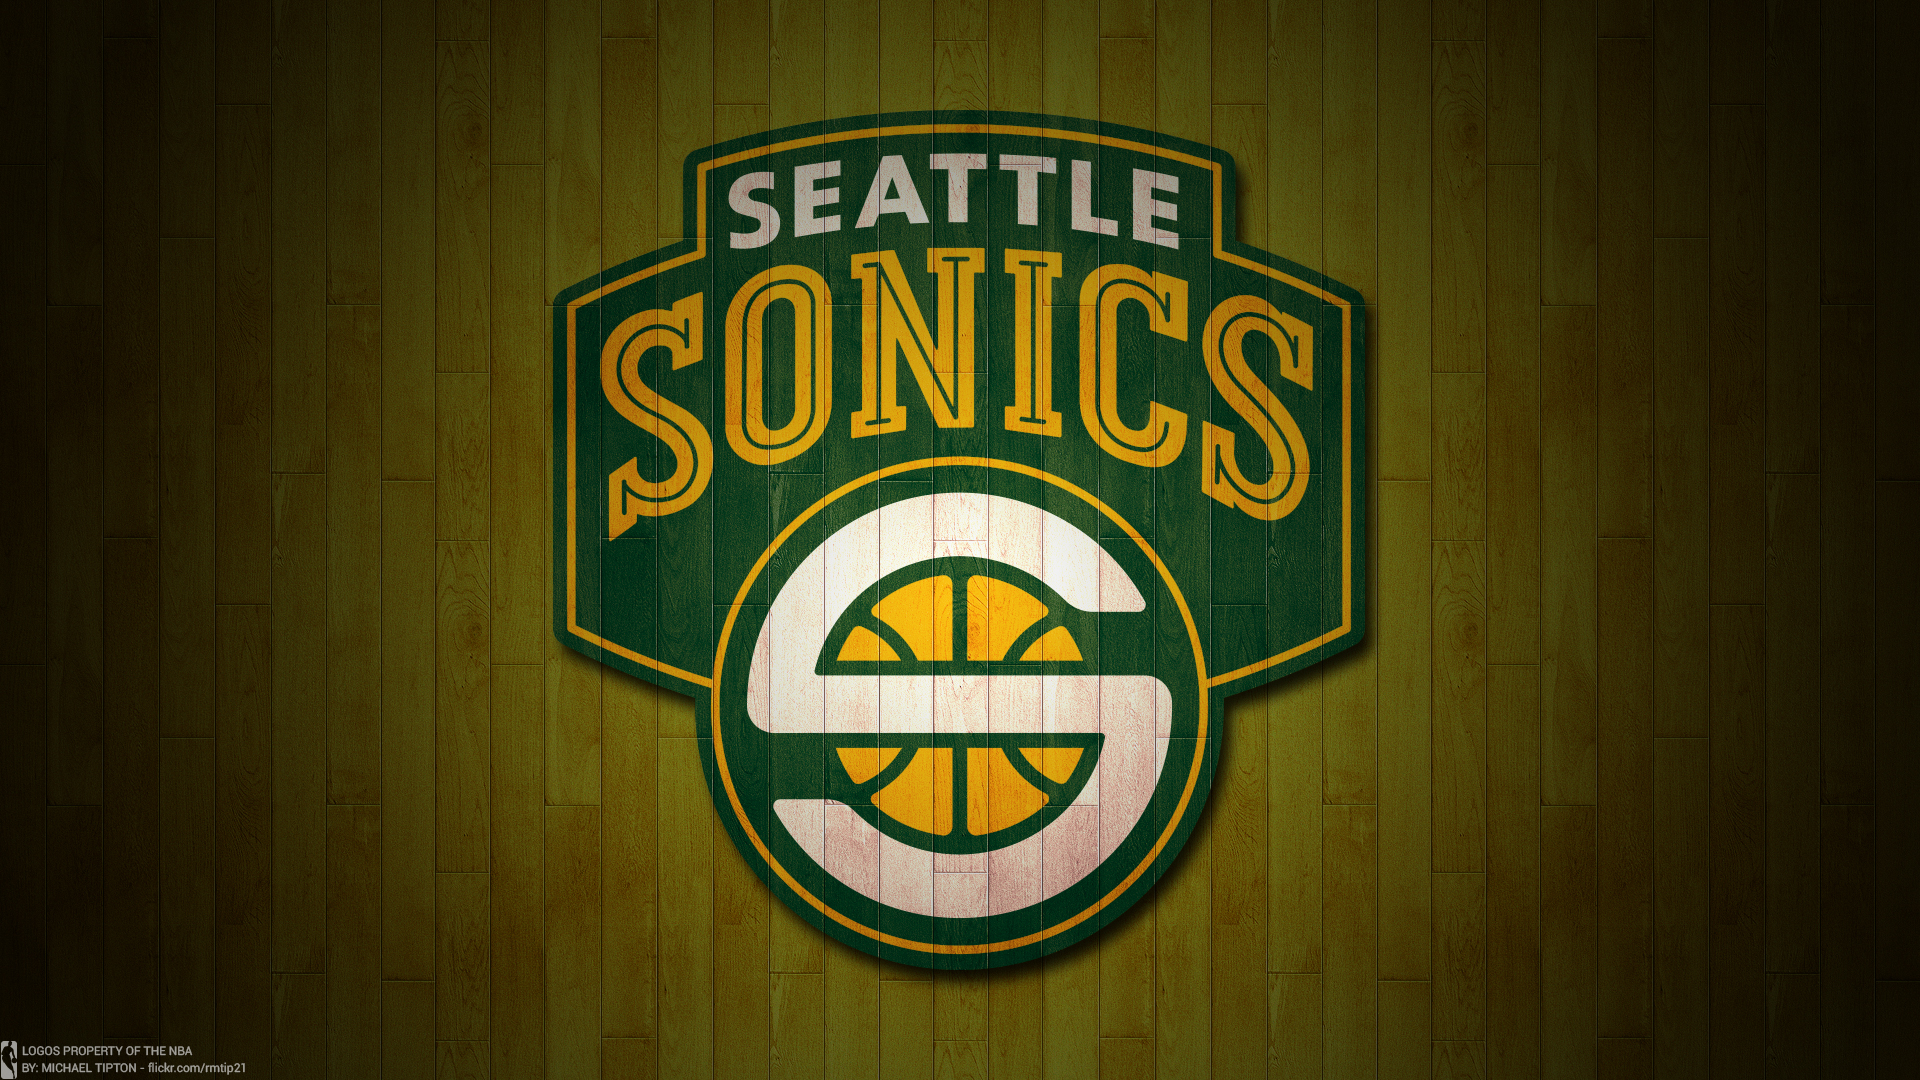 Seattle Supersonics Basketball team by Michael Tipton